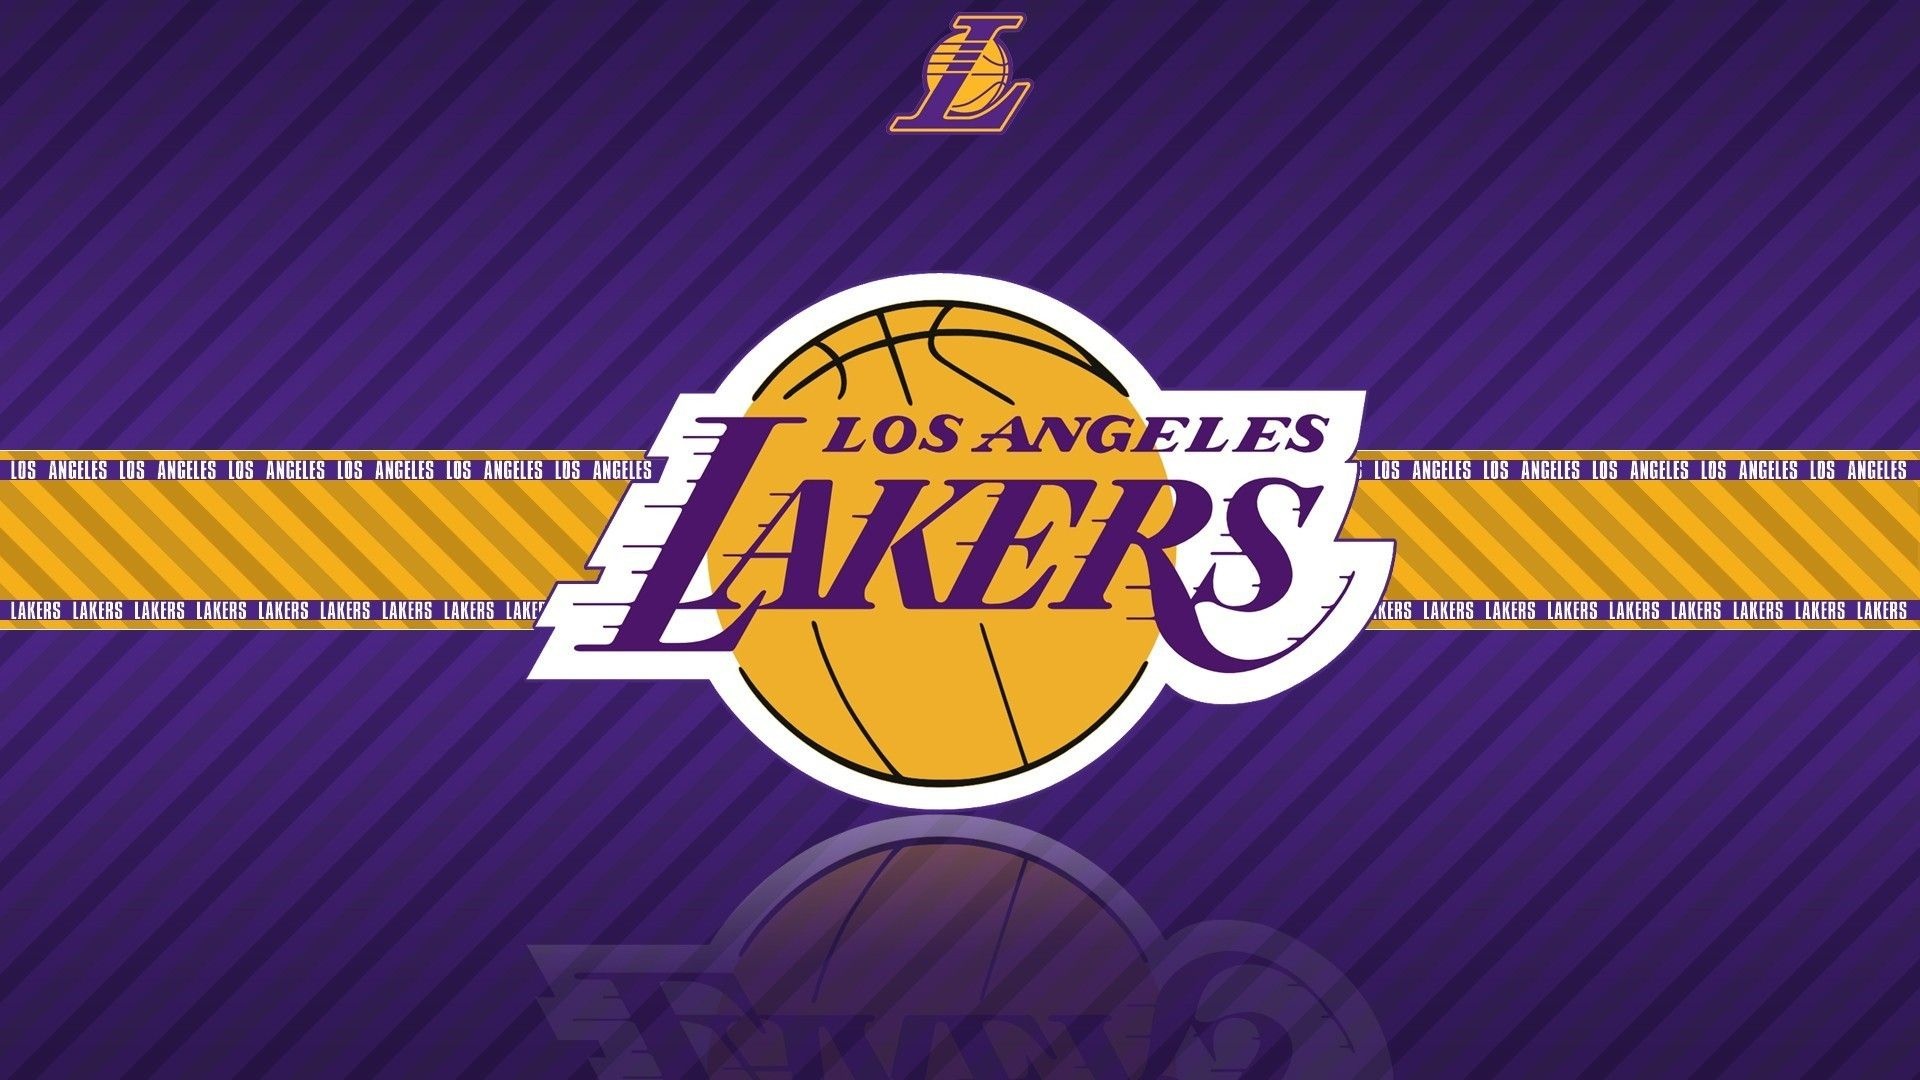 Los Angeles Lakers: The team lost the 2008 NBA Finals to Boston Celtics. 1920x1080 Full HD Wallpaper.